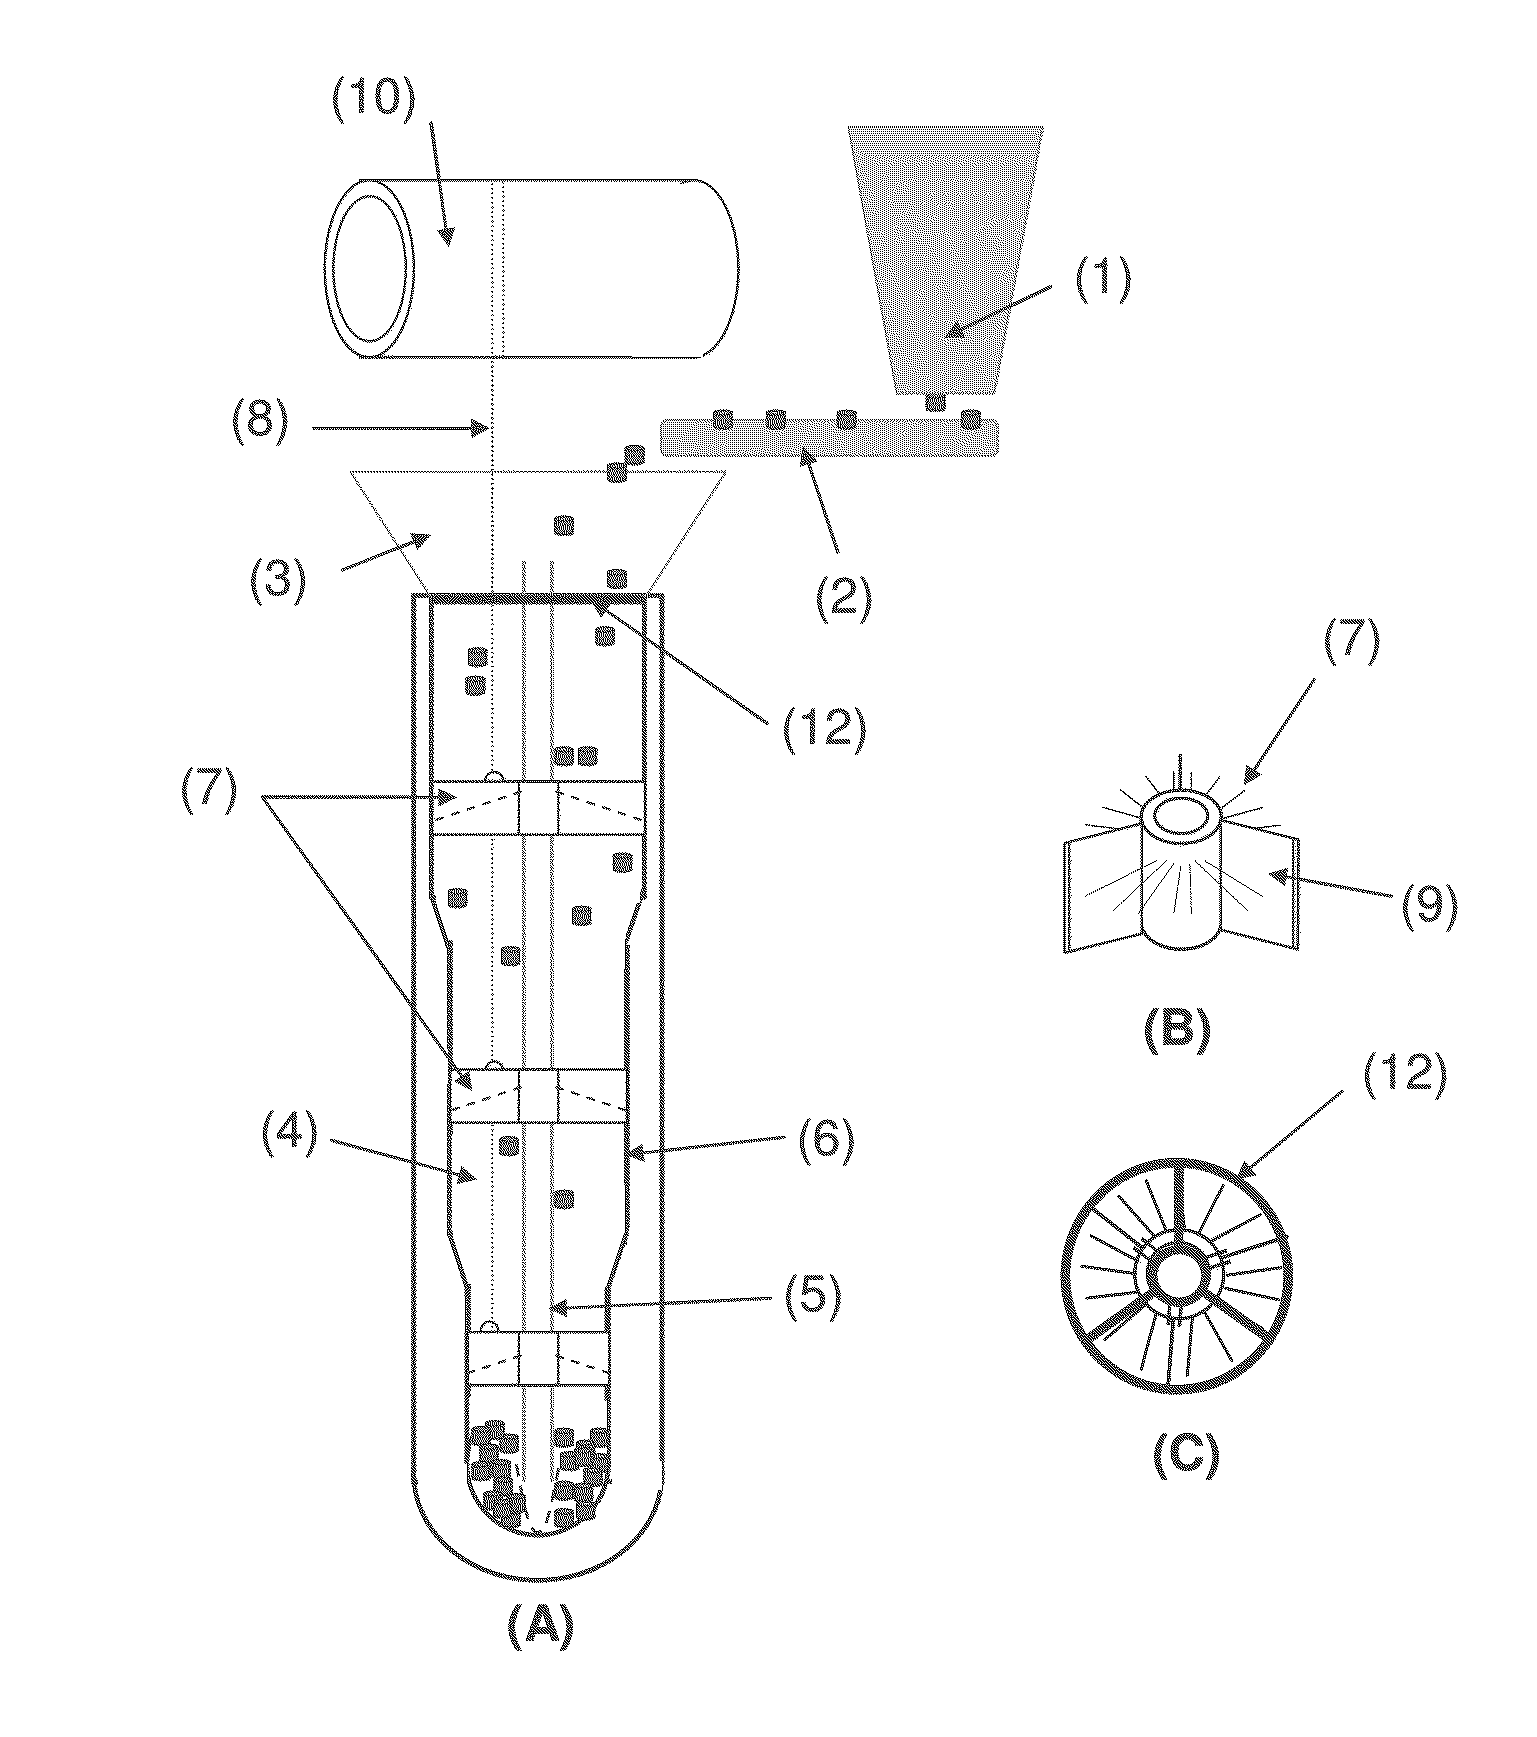 System for dense loading of catalyst into bayonet tubes for a steam reforming exchanger-reactor using flexible and removable slowing elements